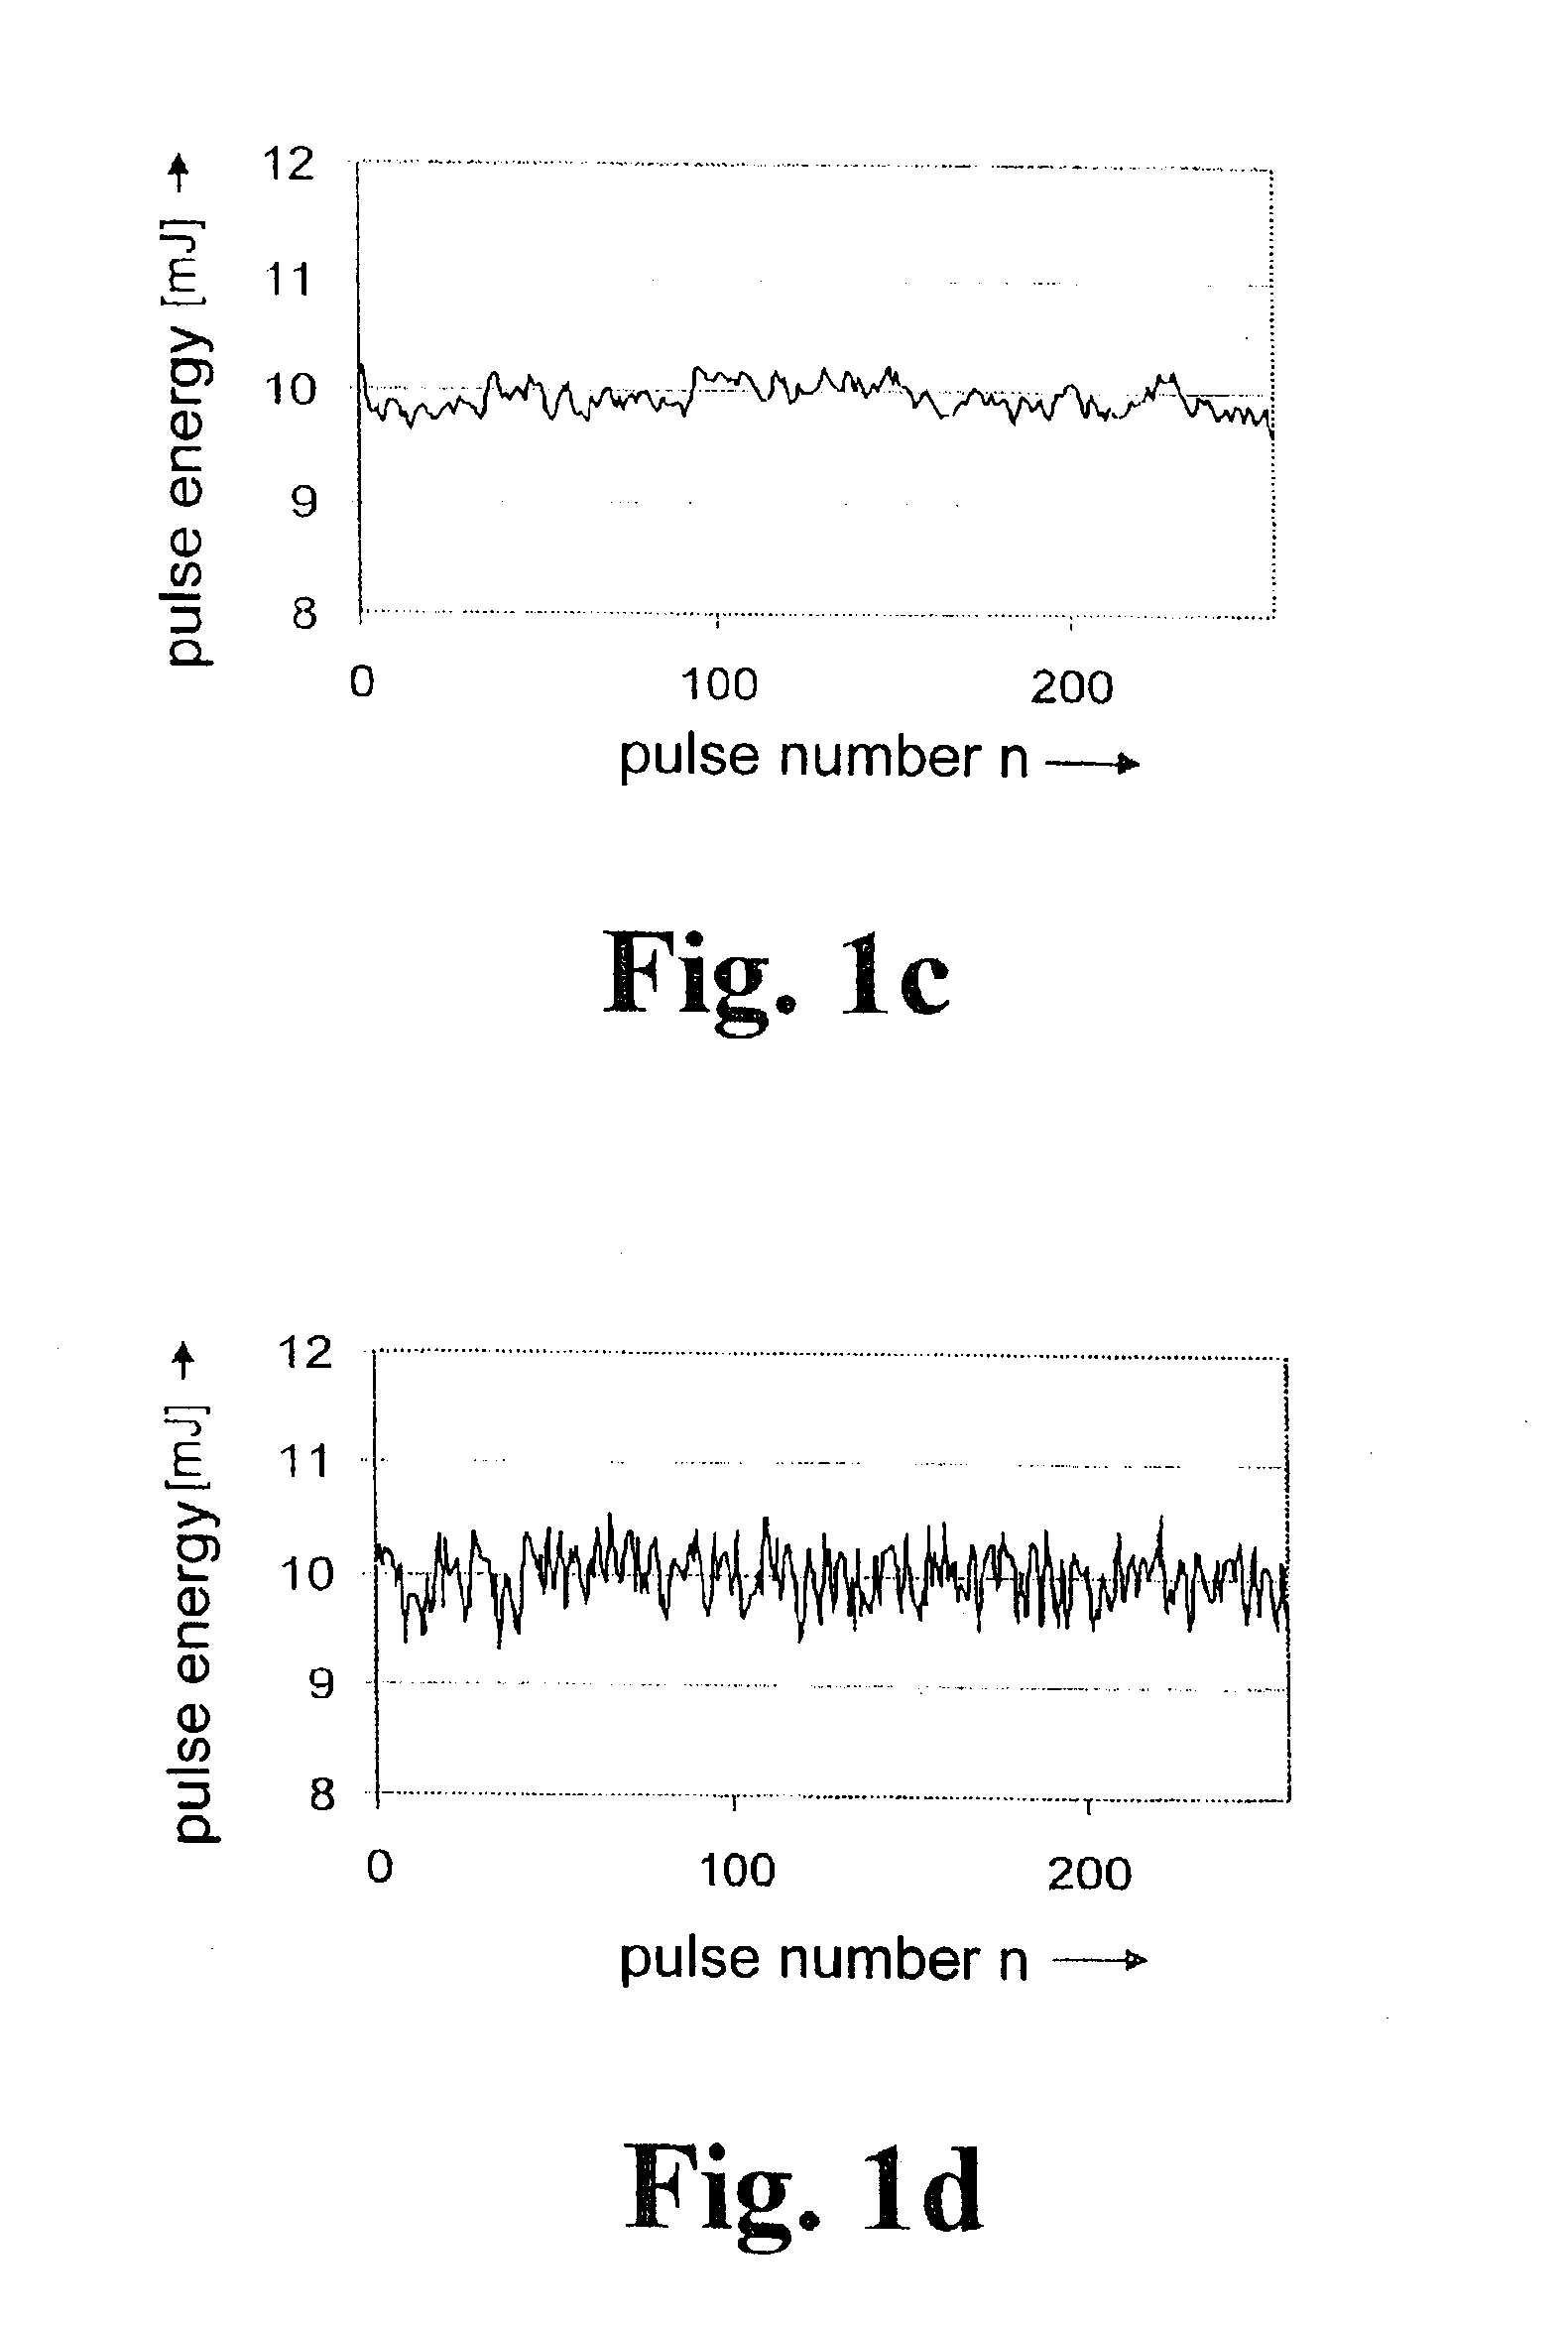 Method for energy stabilization of gas discharged pumped in selected impulse following driven beam sources